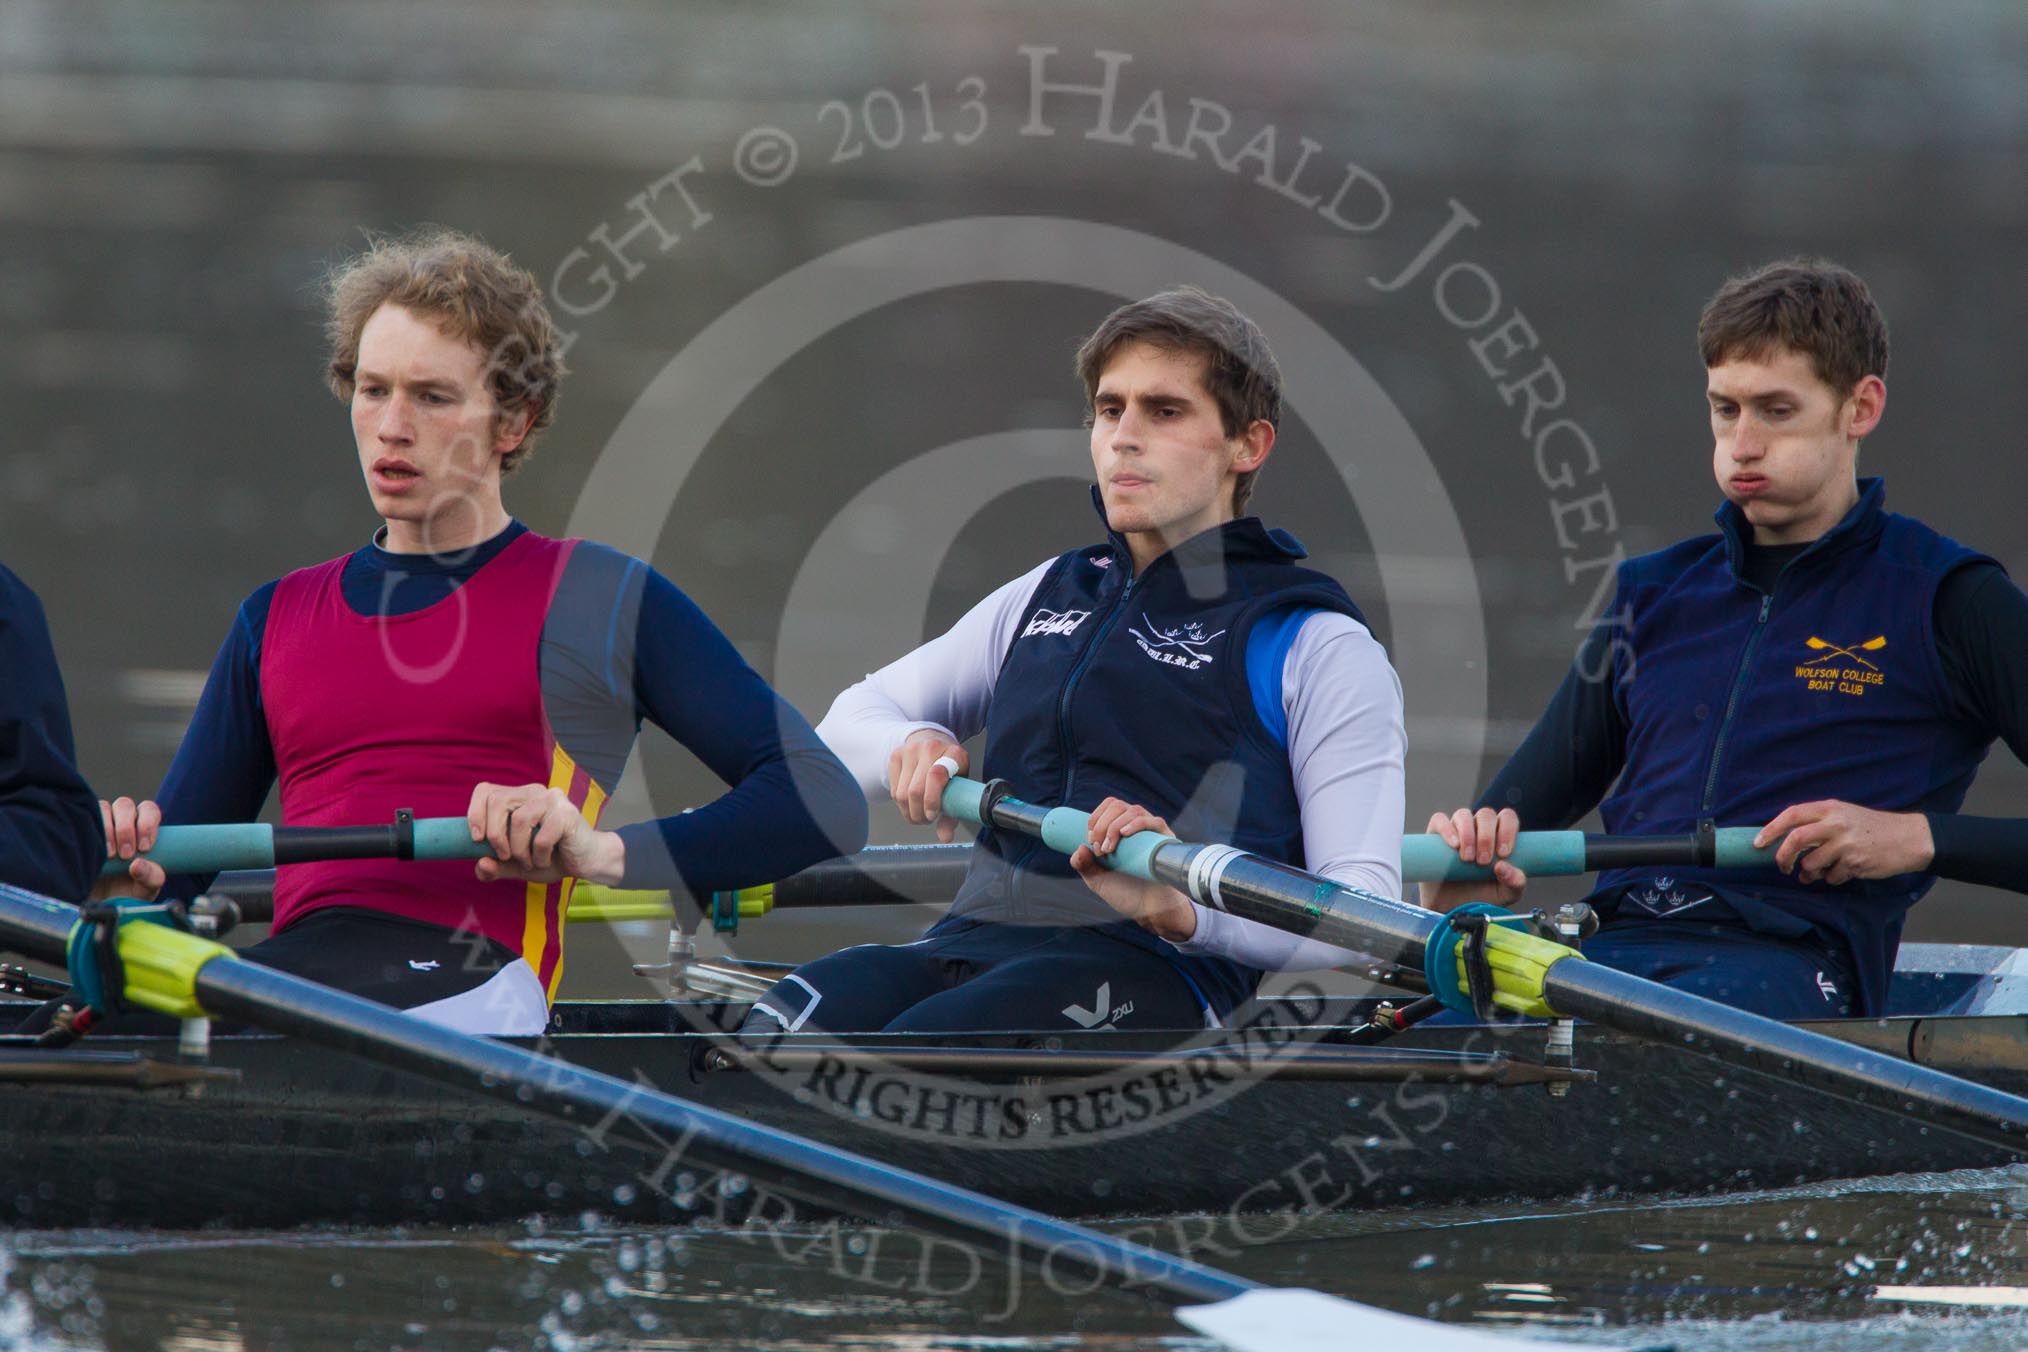 The Boat Race season 2013 - CUWBC training: The OULRC boat - 3 seat Keir Macdonald, 2 Benjamin Bronselaer and bow James Kirkbride..
River Thames near Remenham,
Henley-on-Thames,
Oxfordshire,
United Kingdom,
on 19 March 2013 at 16:29, image #137